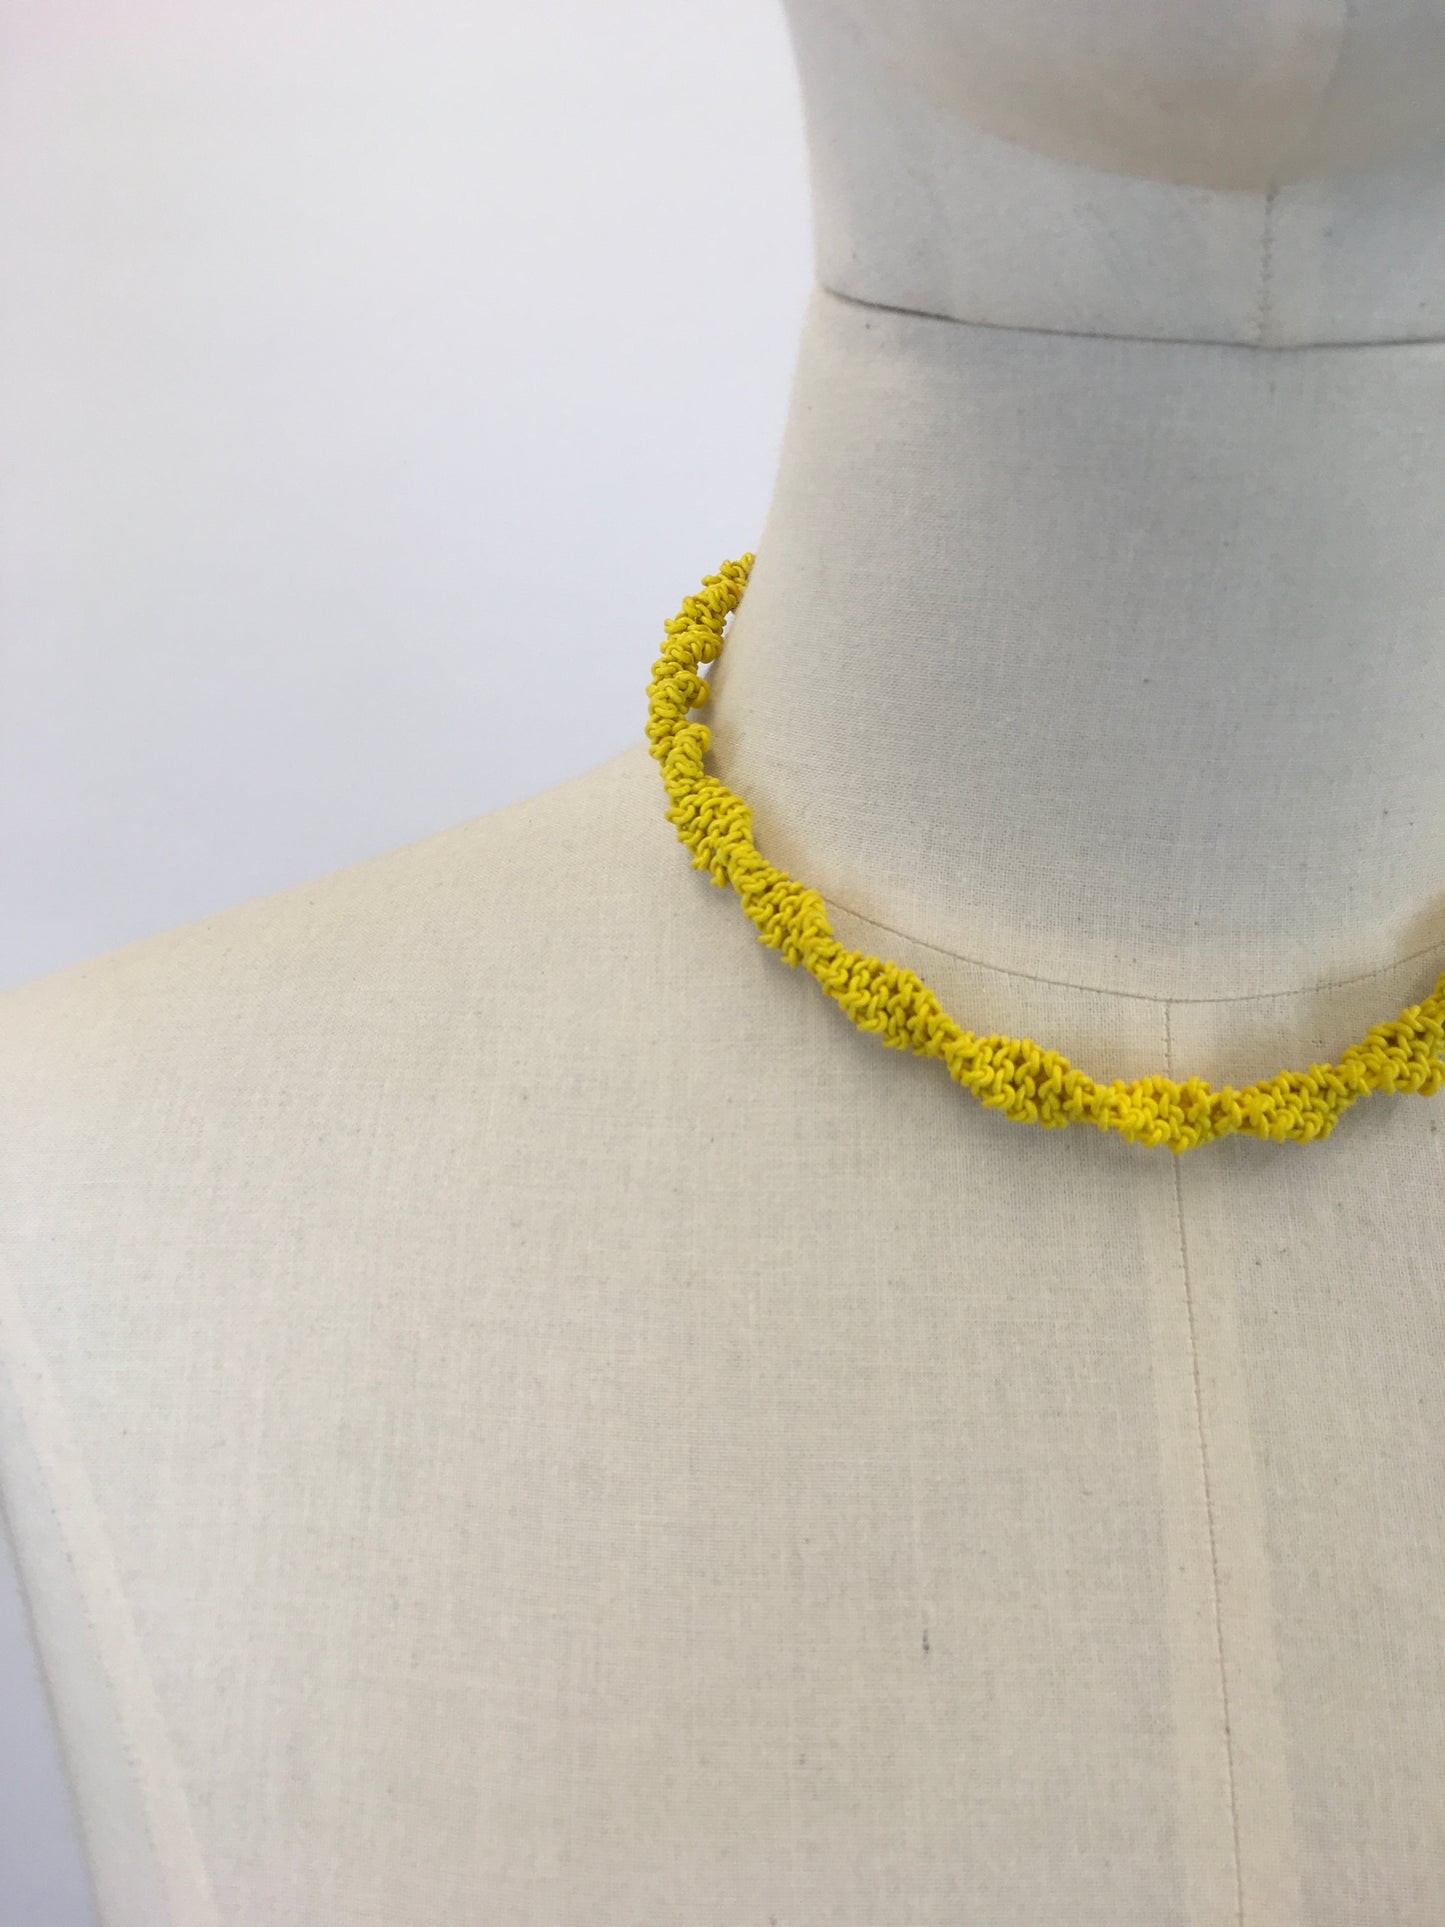 Original 1940’s Scoobie Necklace From Telephone Cord - In Sunshine Yellow